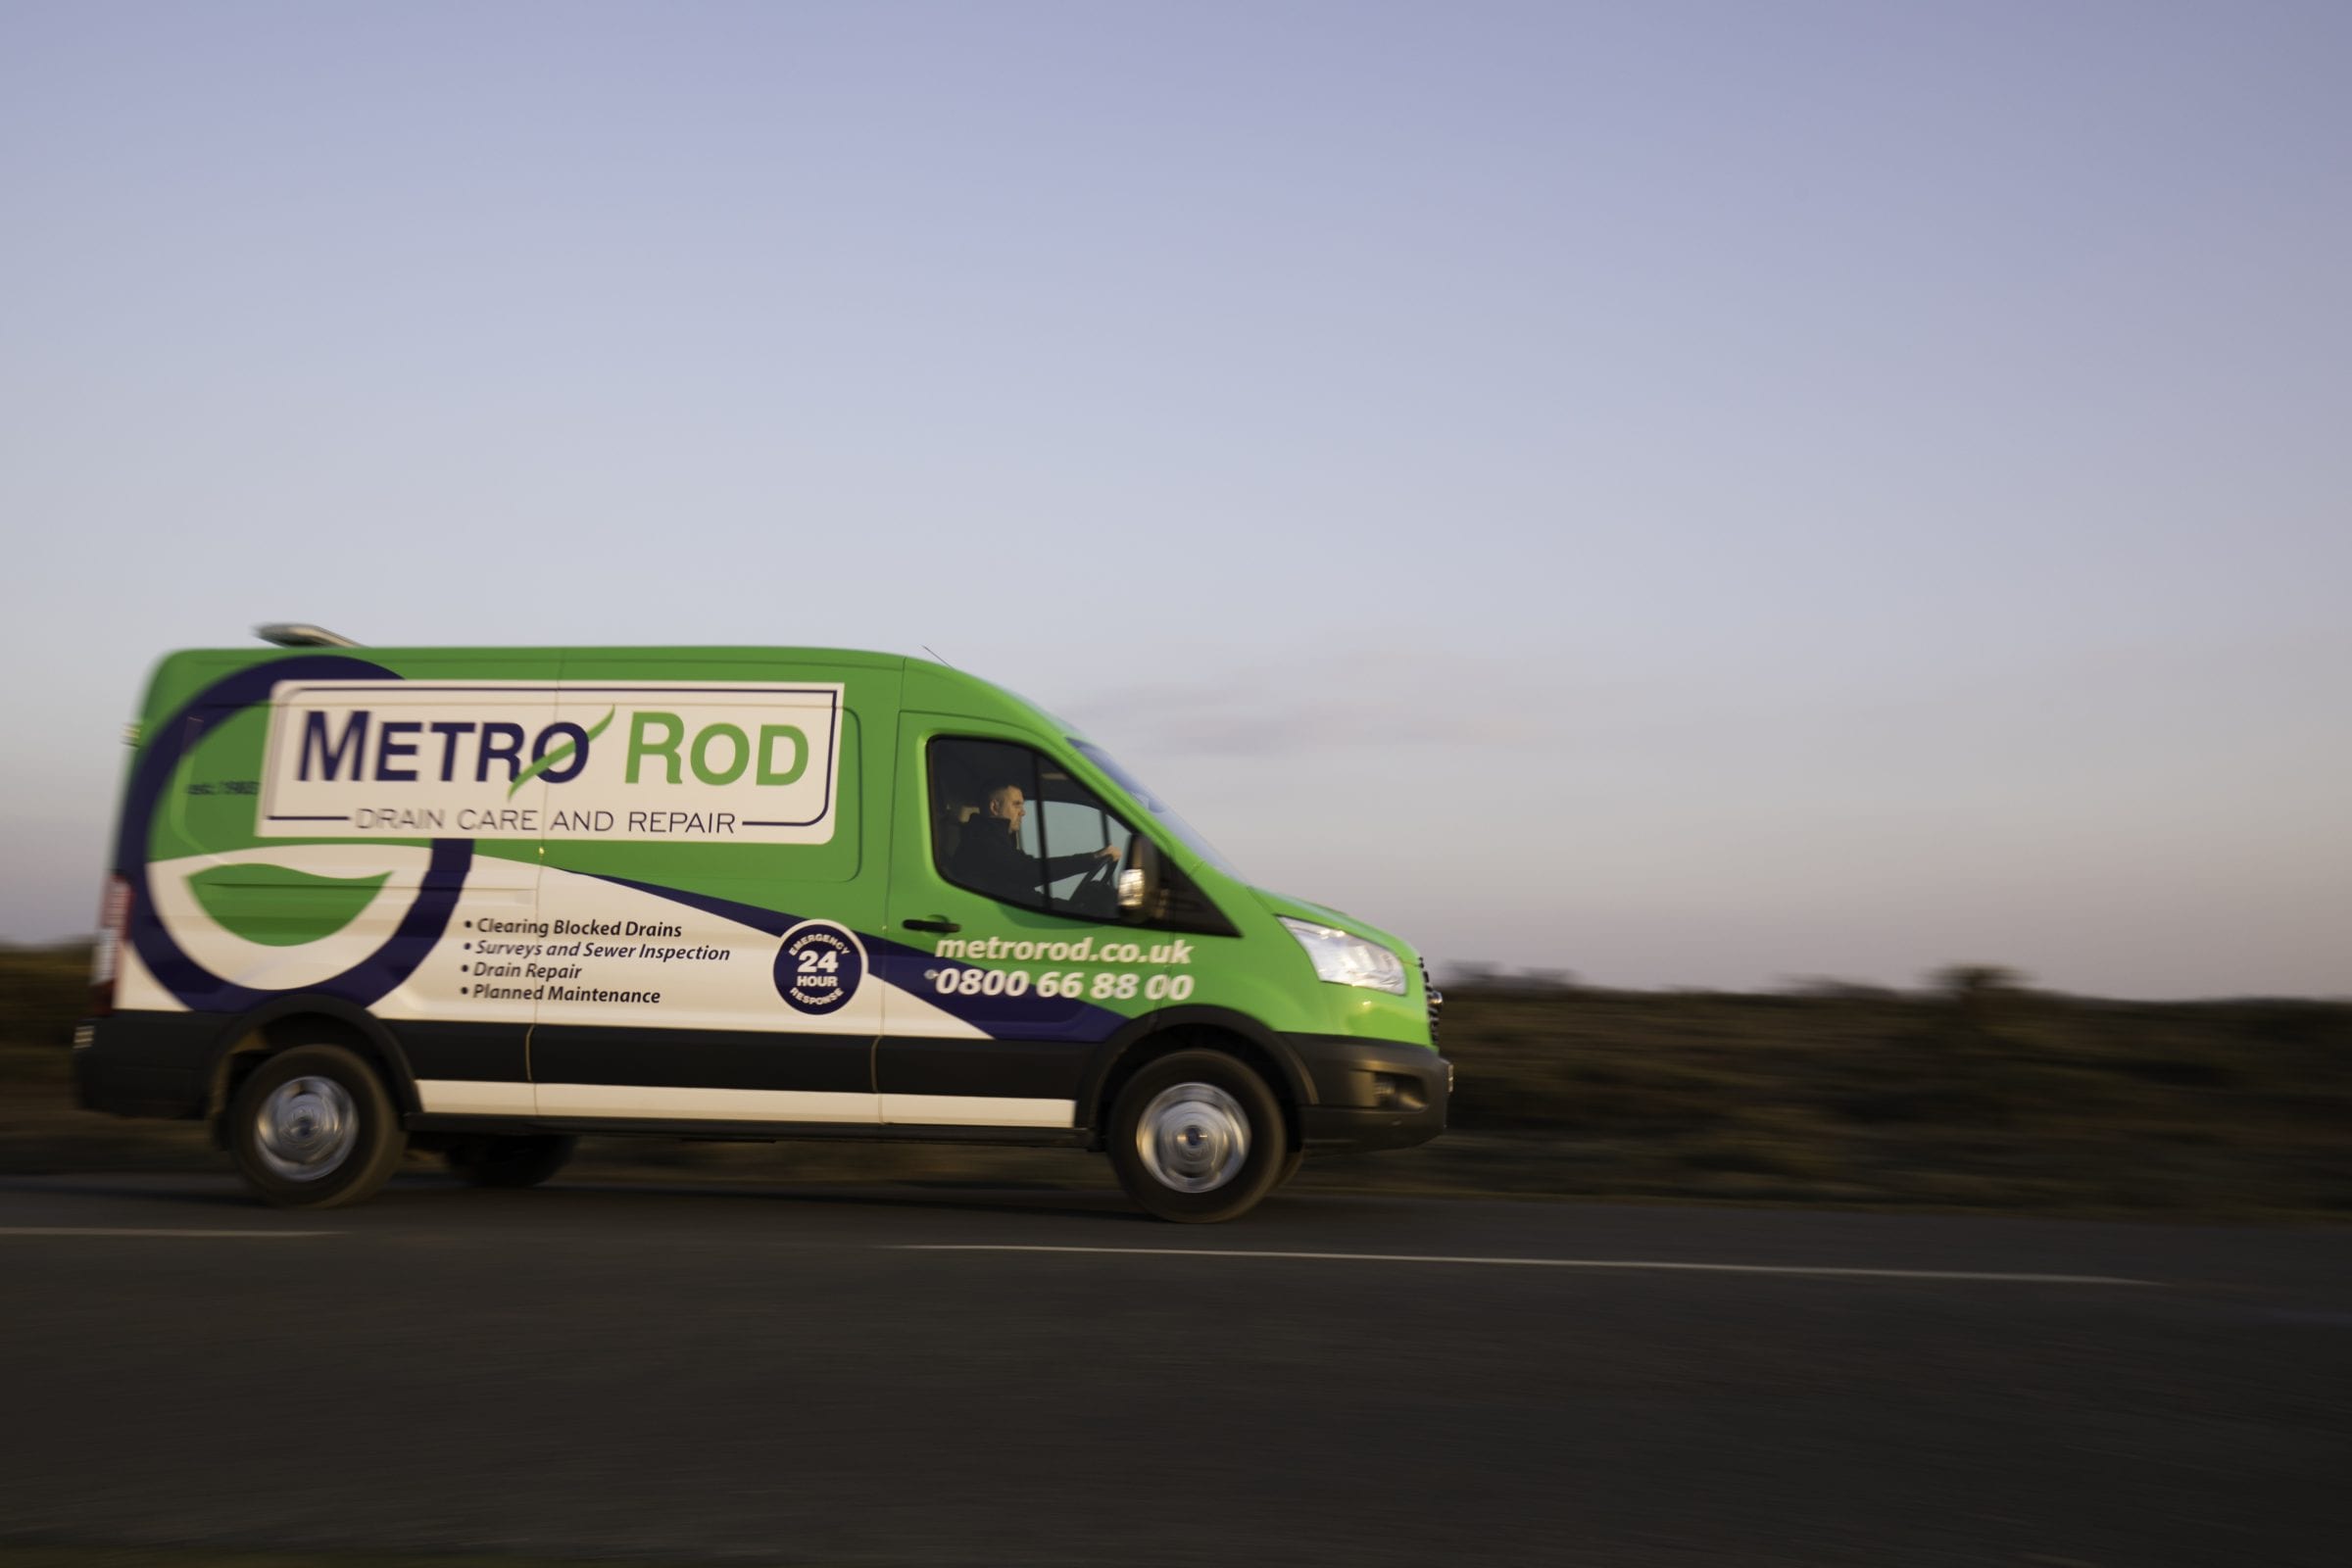 METRO ROD DORSET & PORTSMOUTH DRAINAGE PRE-PLANNED MAINTENANCE FOR SCHOOLS